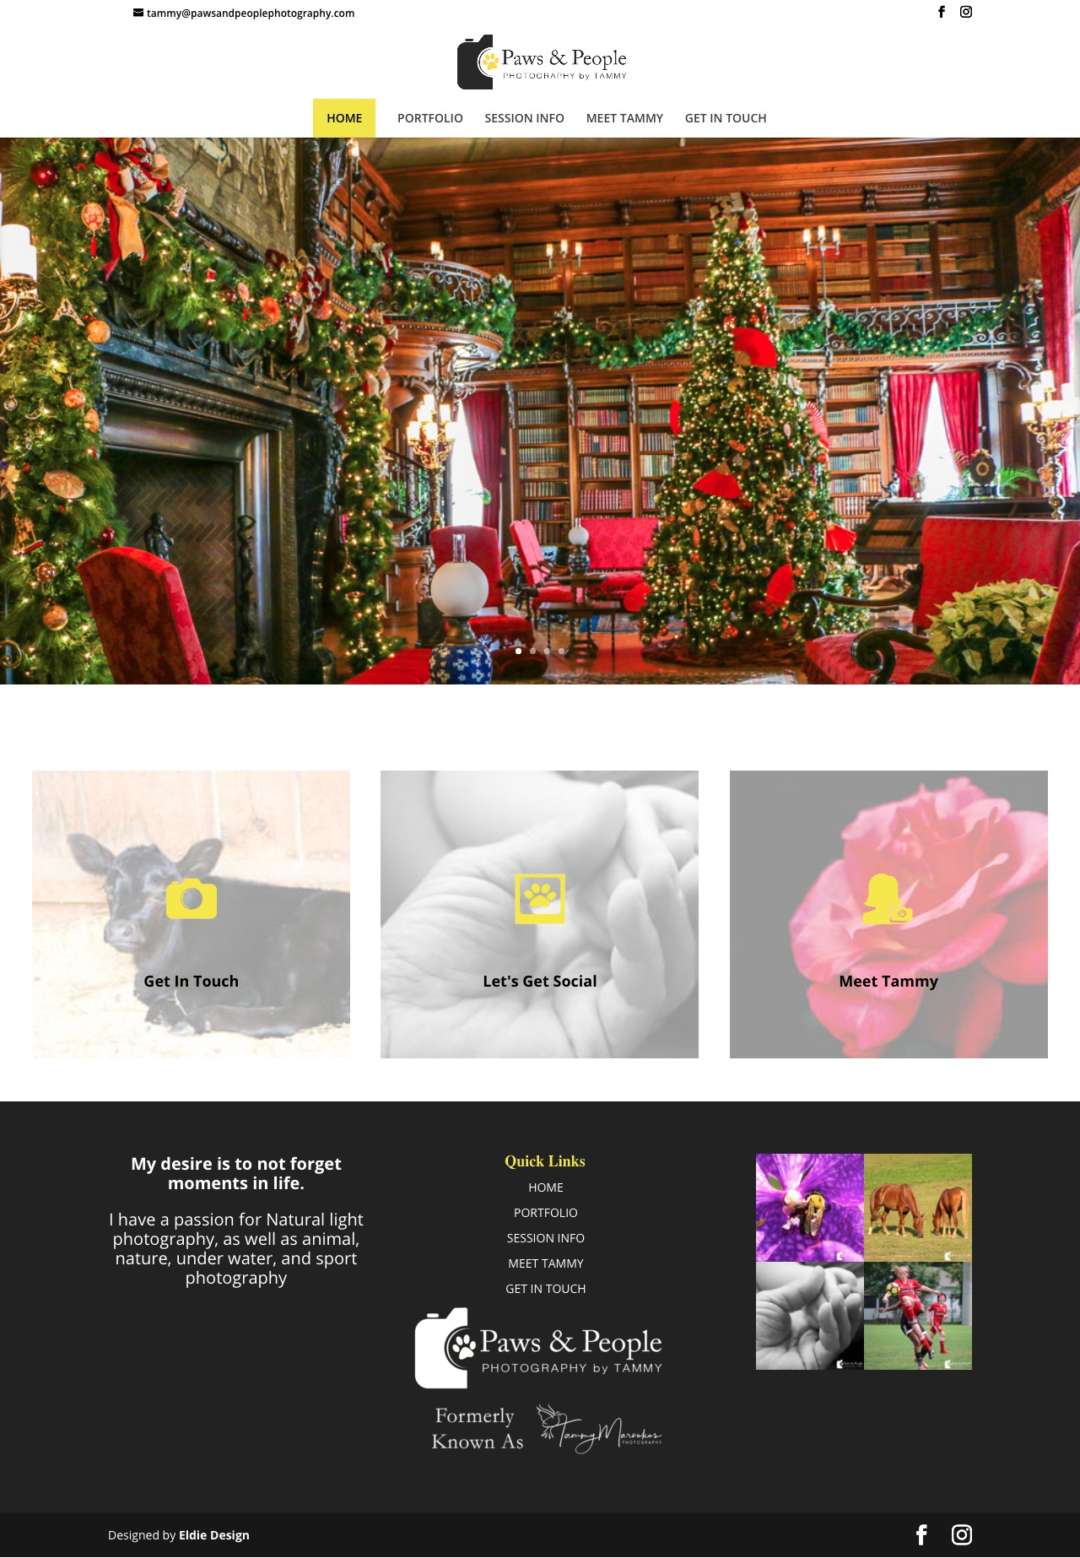 This is a photo of a website designed by Eldie Design, a Johnson City Web Design Company.